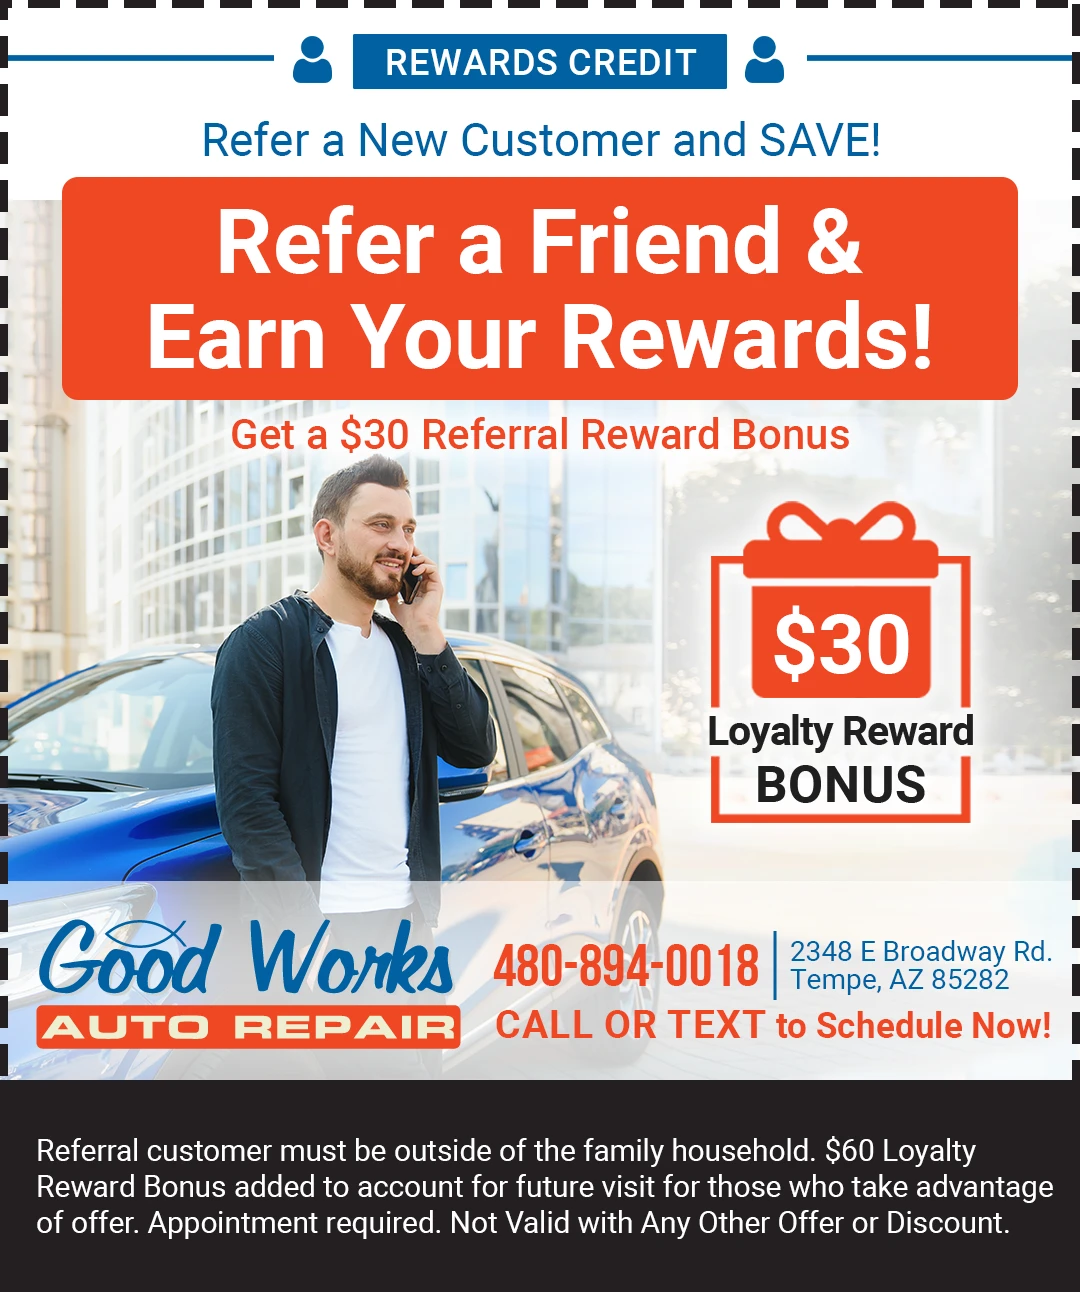 Refer a new customer for extra rewards credit